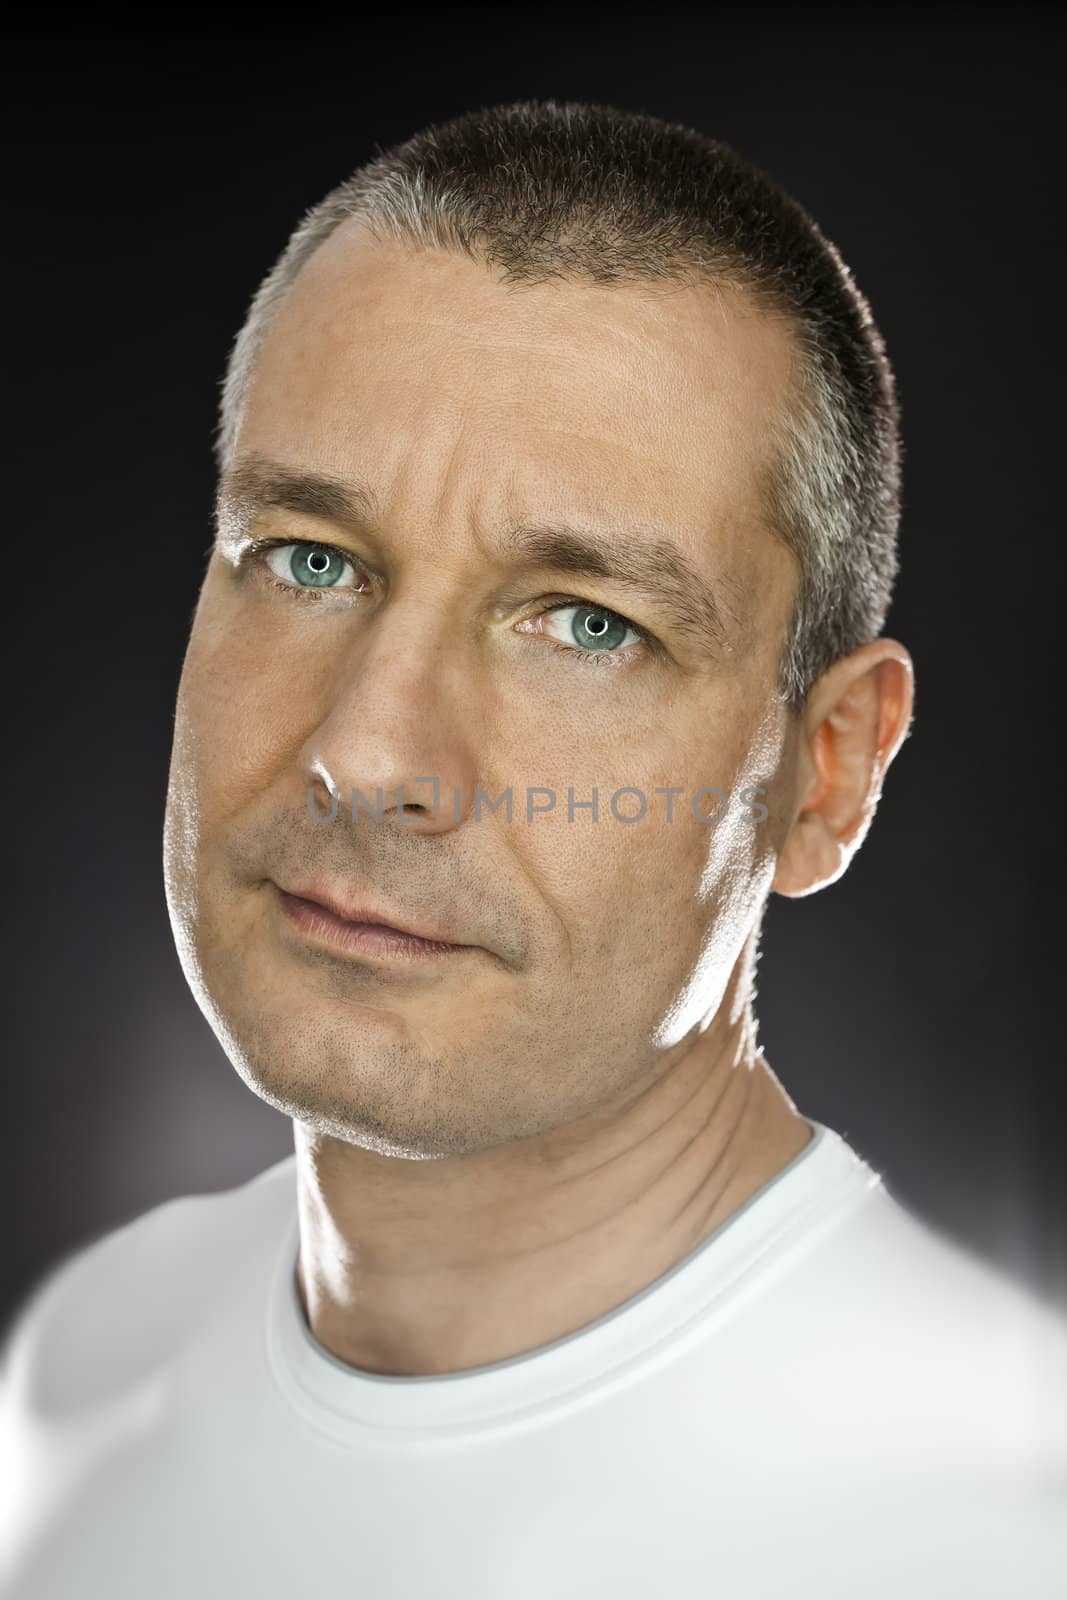 An image of a nice male portrait